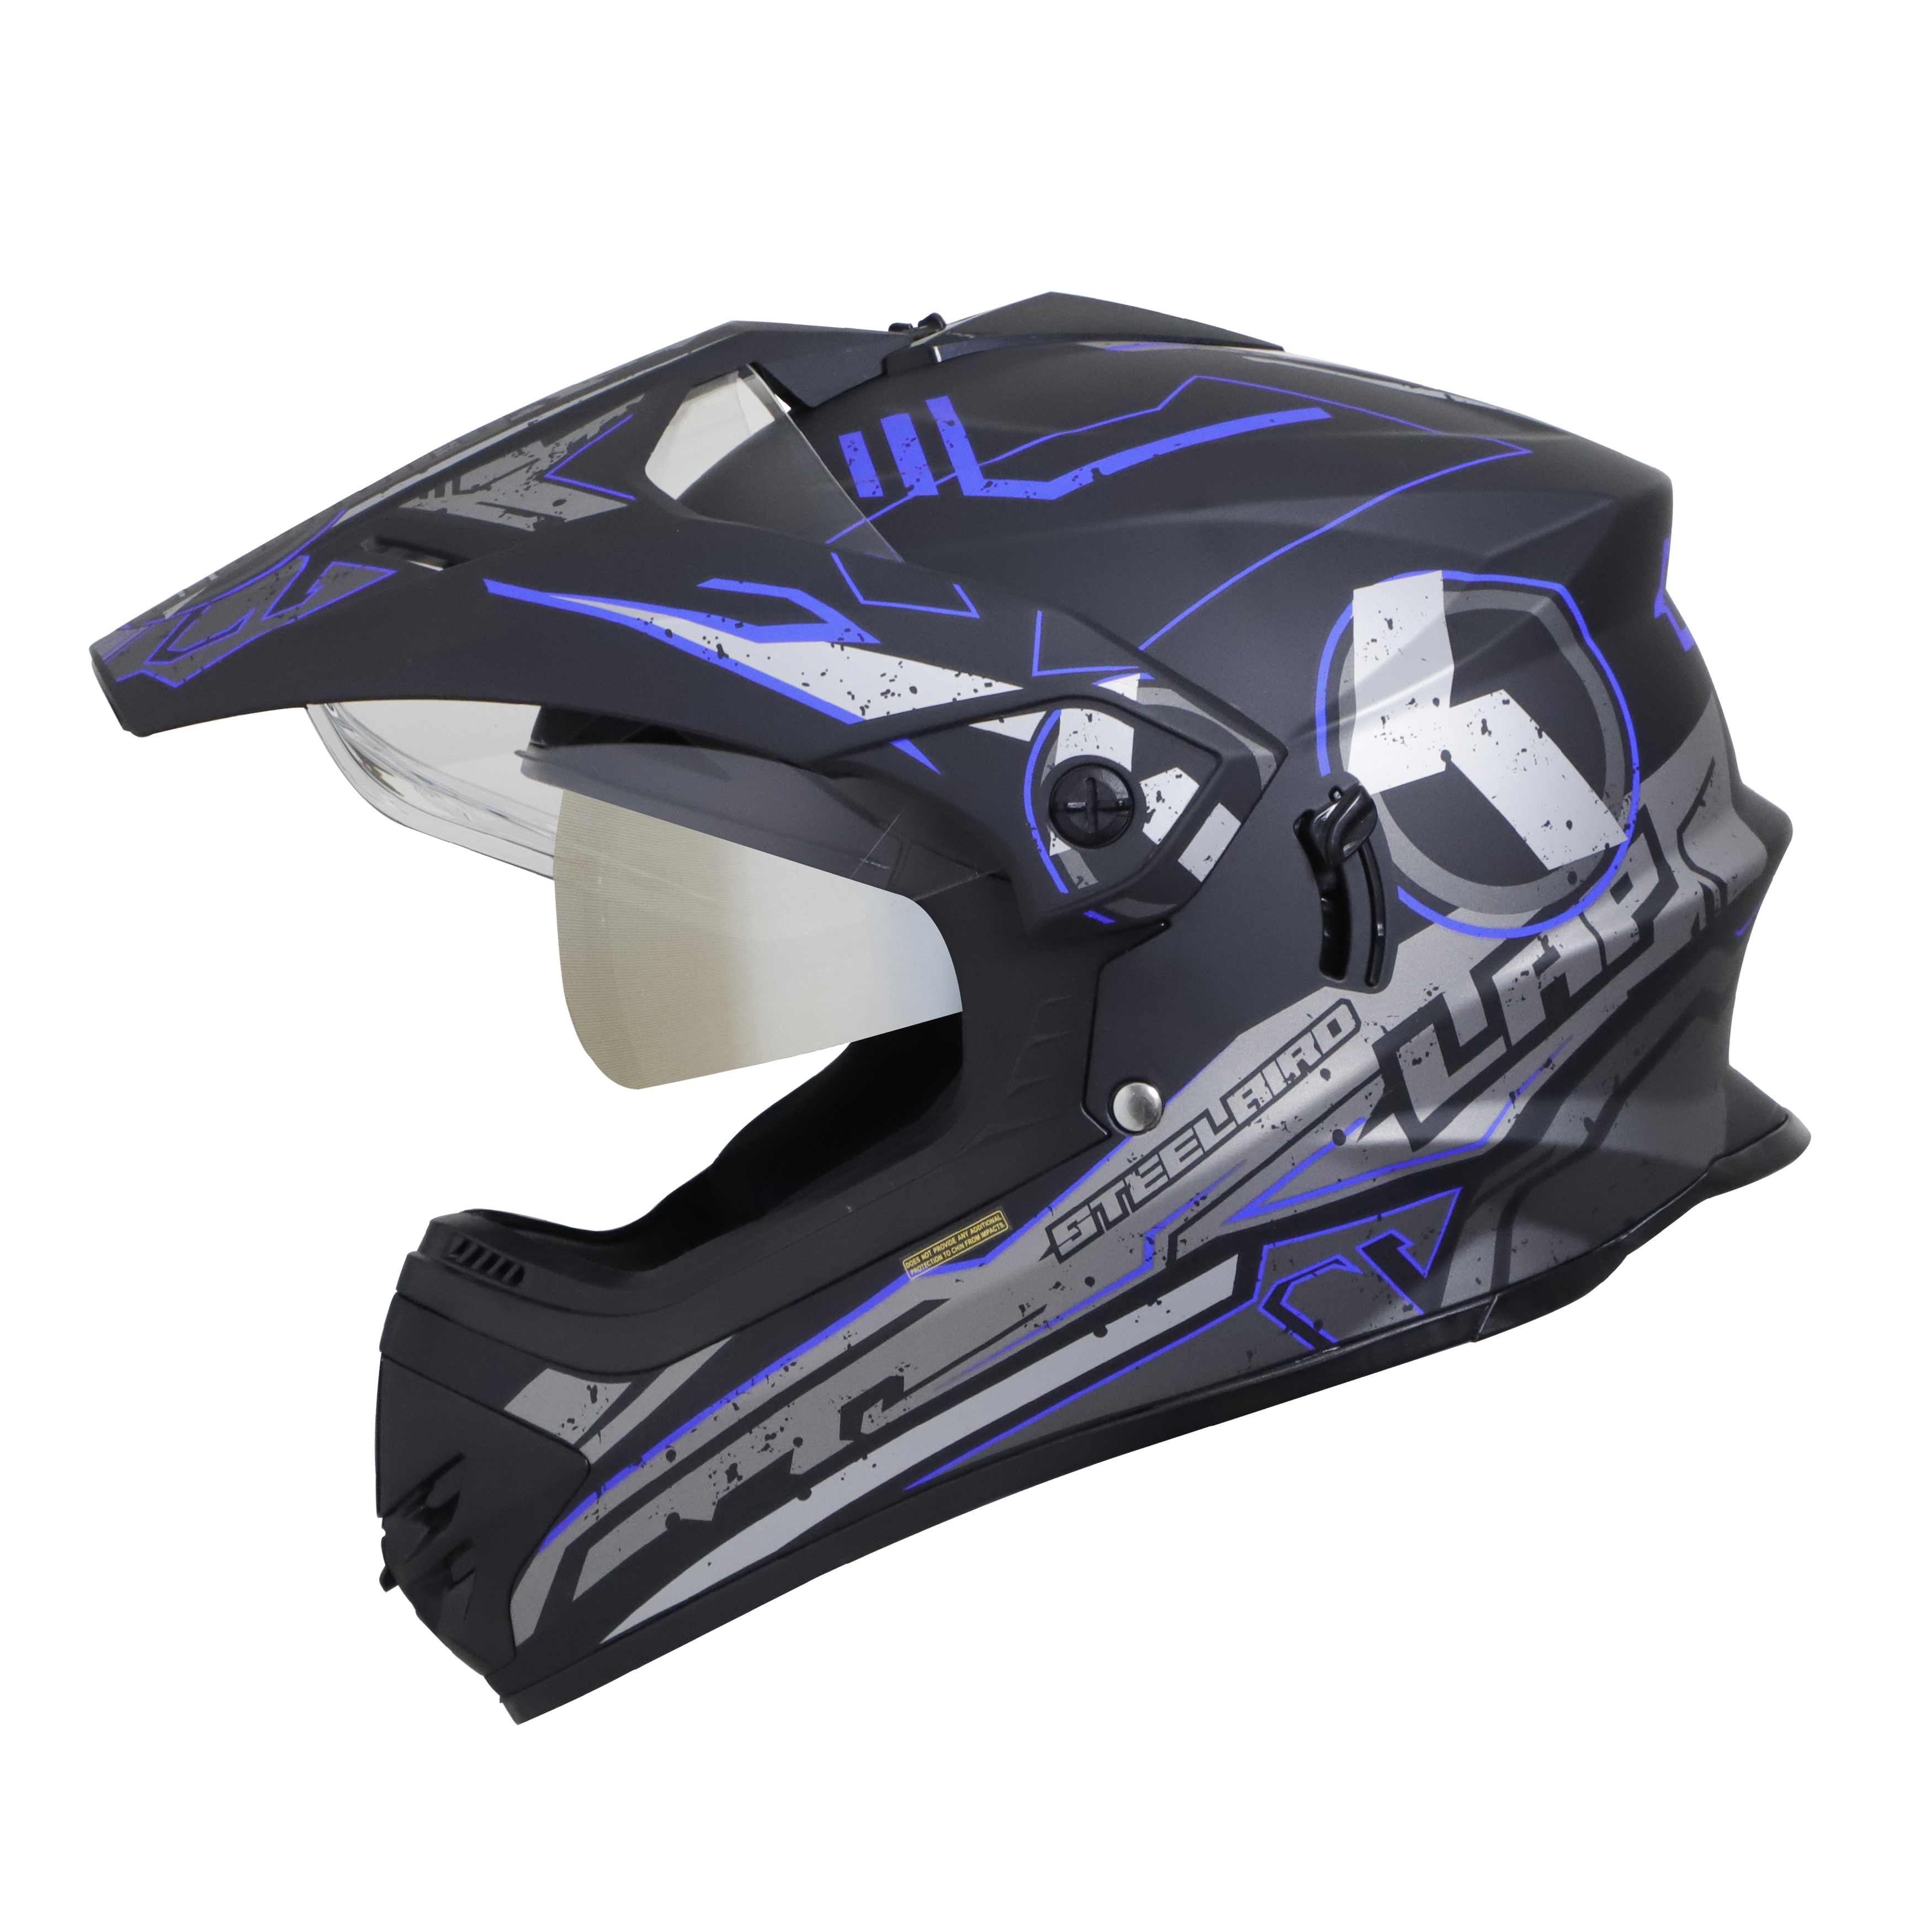 SB-42 BANG LAP GLOSSY BLACK WITH BLUE (WITH CHROME SILVER INNER SUN SHIELD)